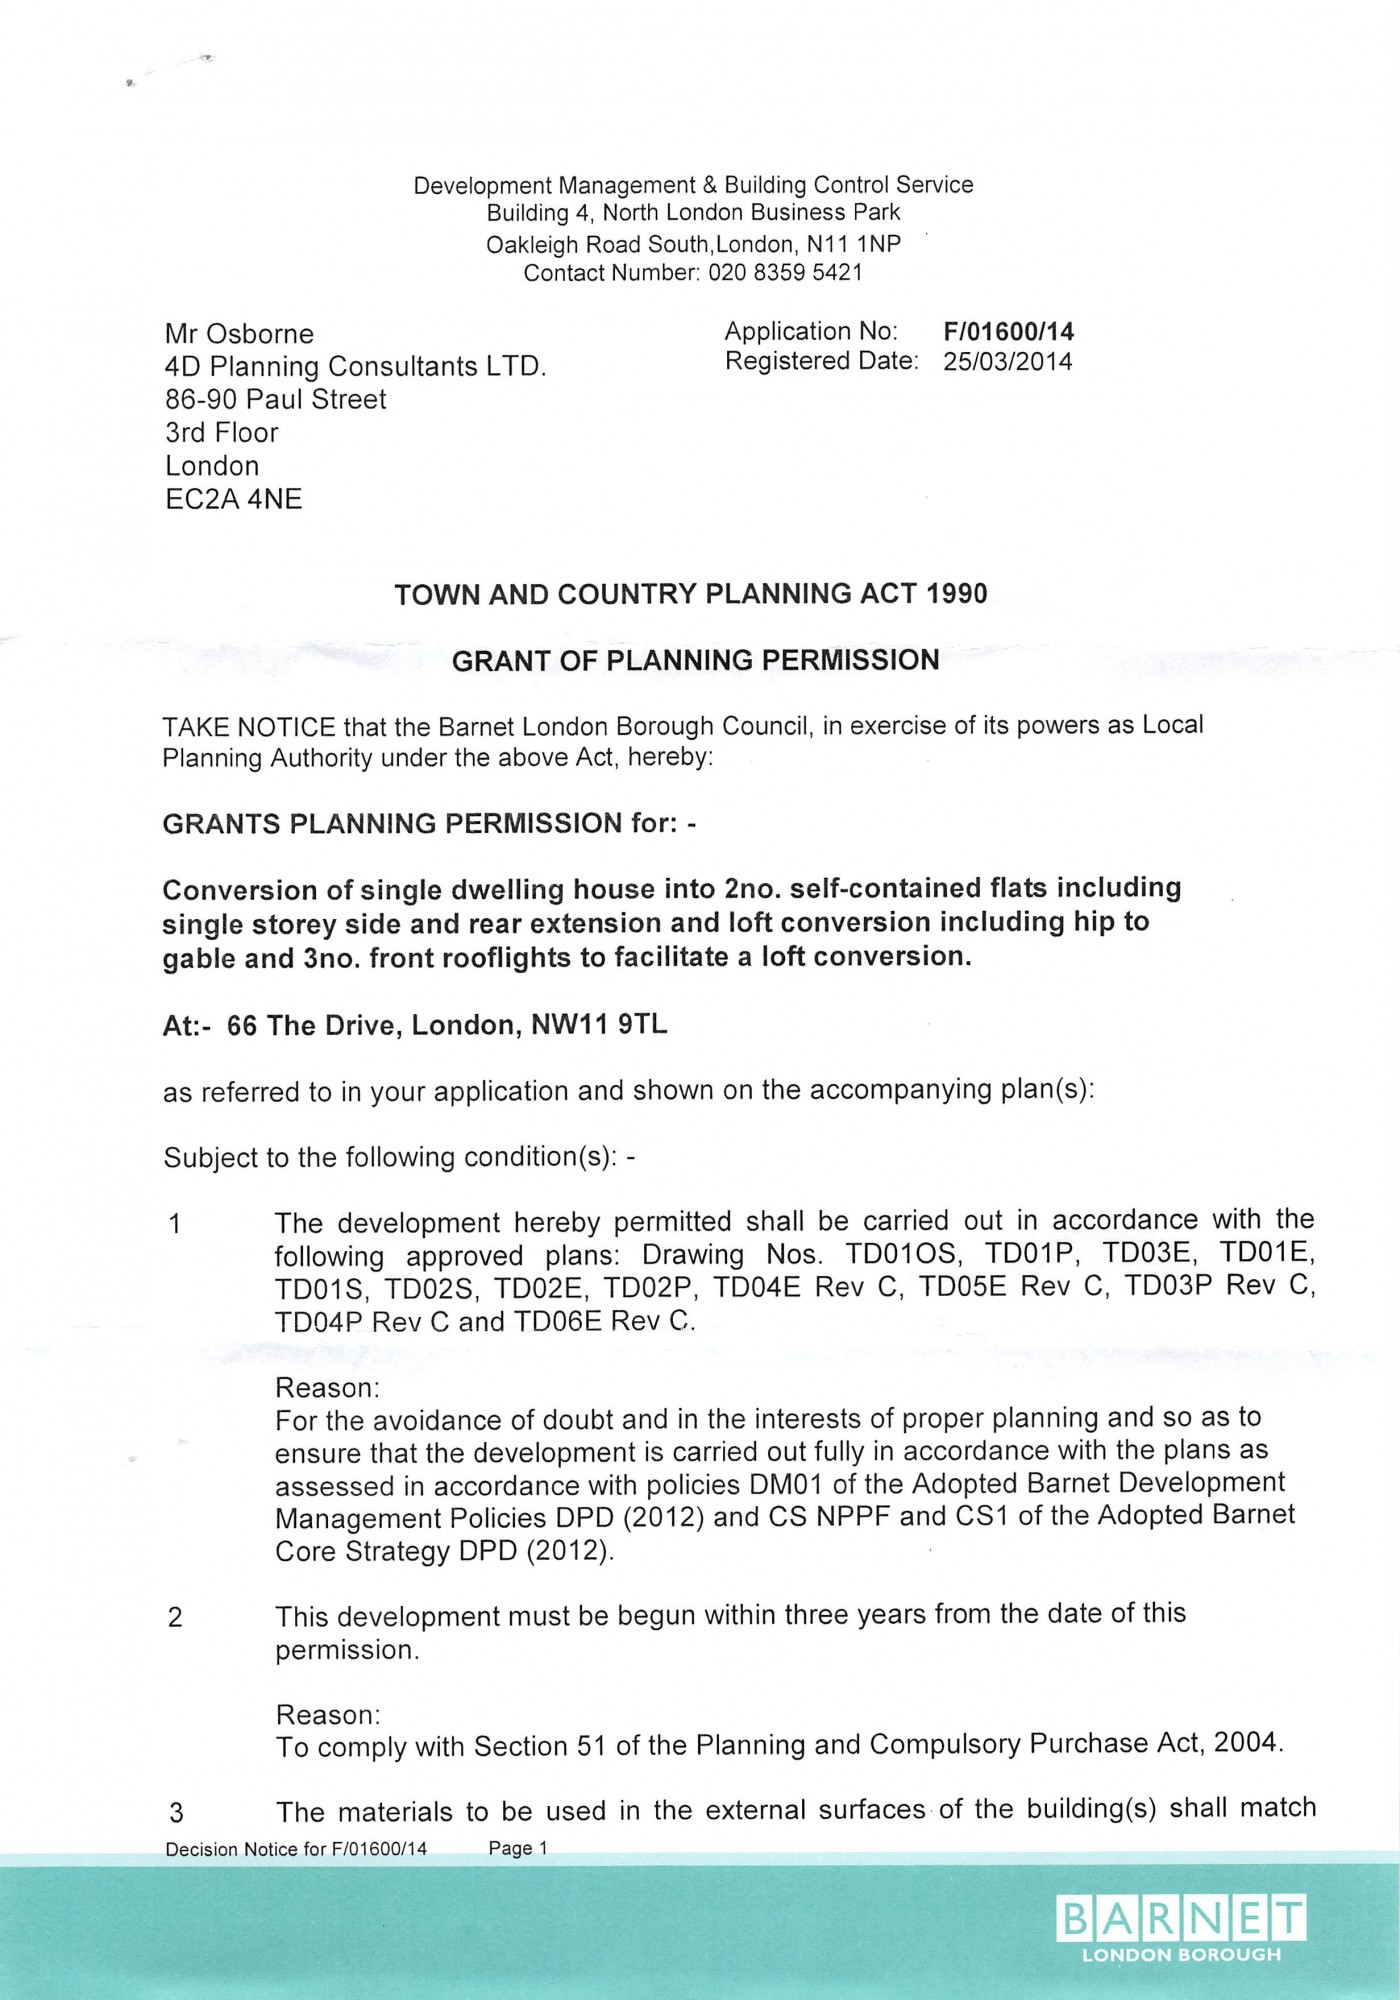 Approval Notice - Barnet Council